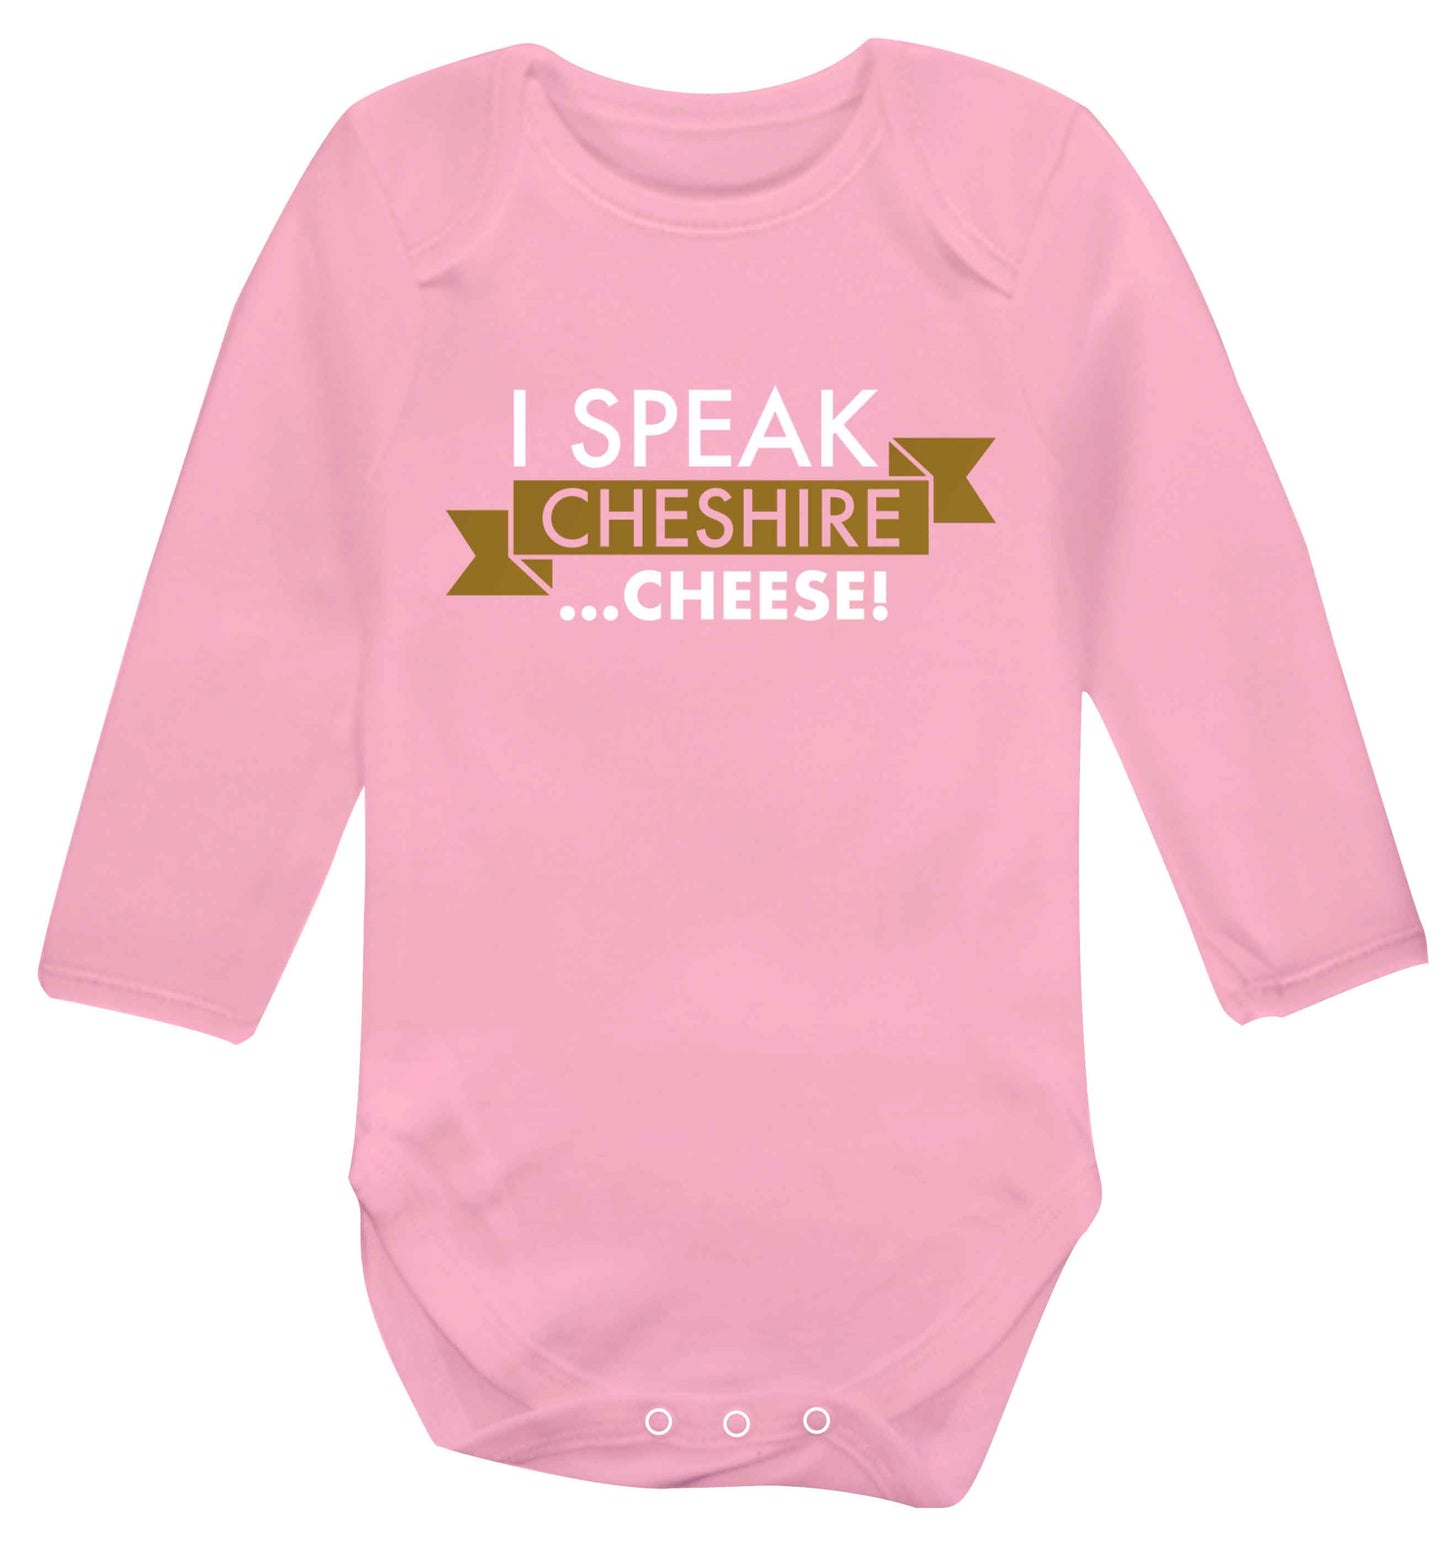 I speak Cheshire cheese Baby Vest long sleeved pale pink 6-12 months